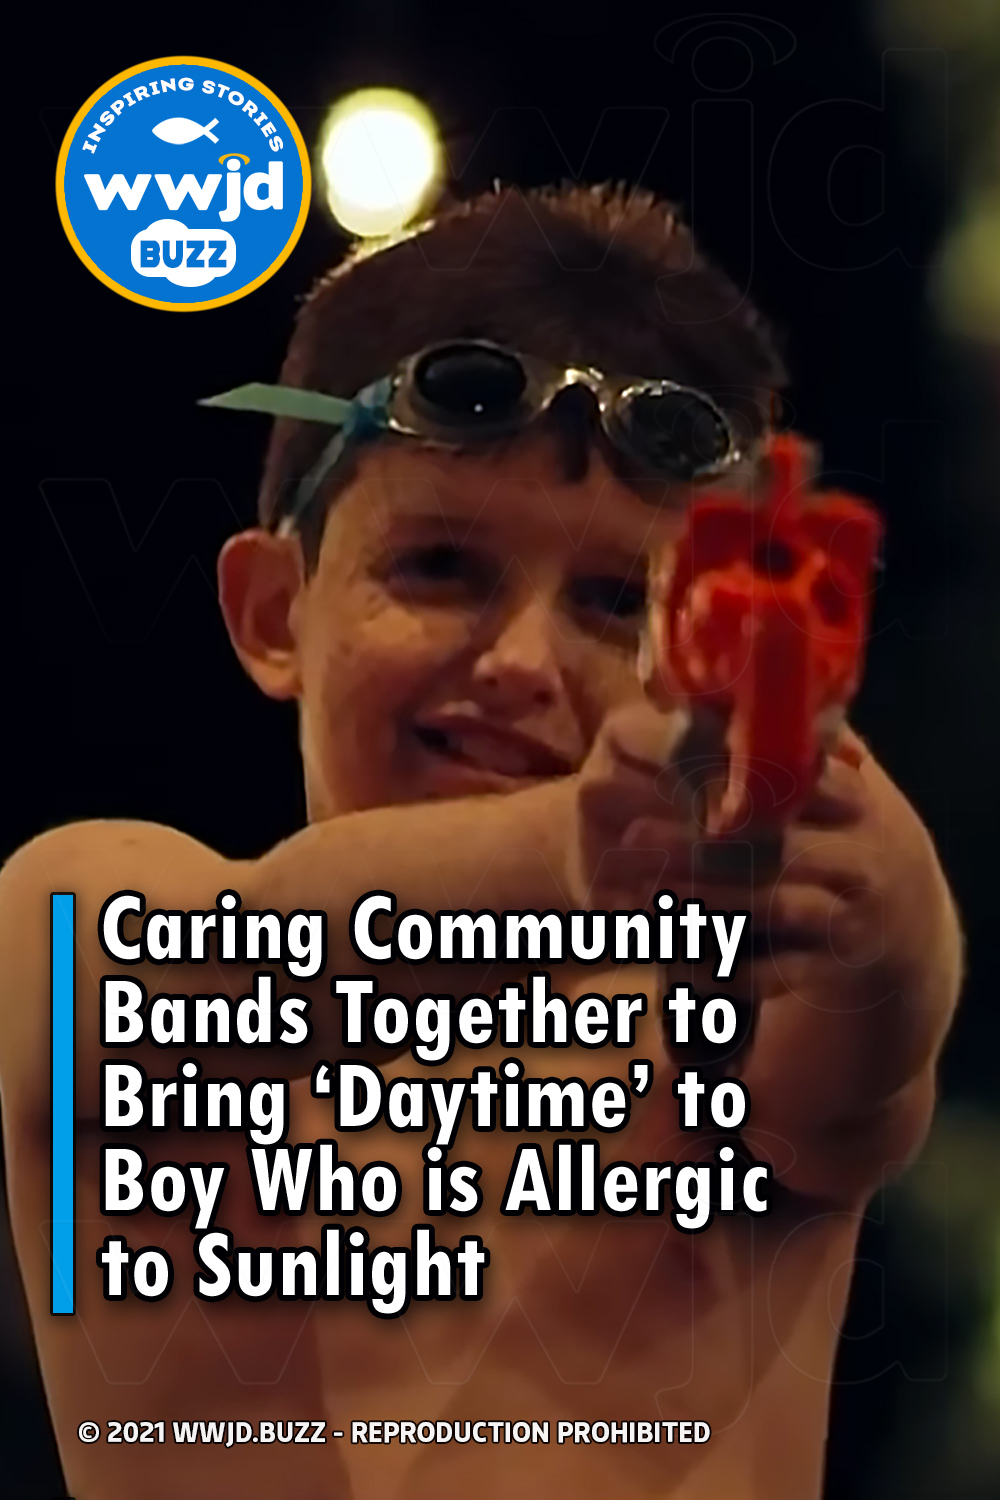 Caring Community Bands Together to Bring ‘Daytime’ to Boy Who is Allergic to Sunlight